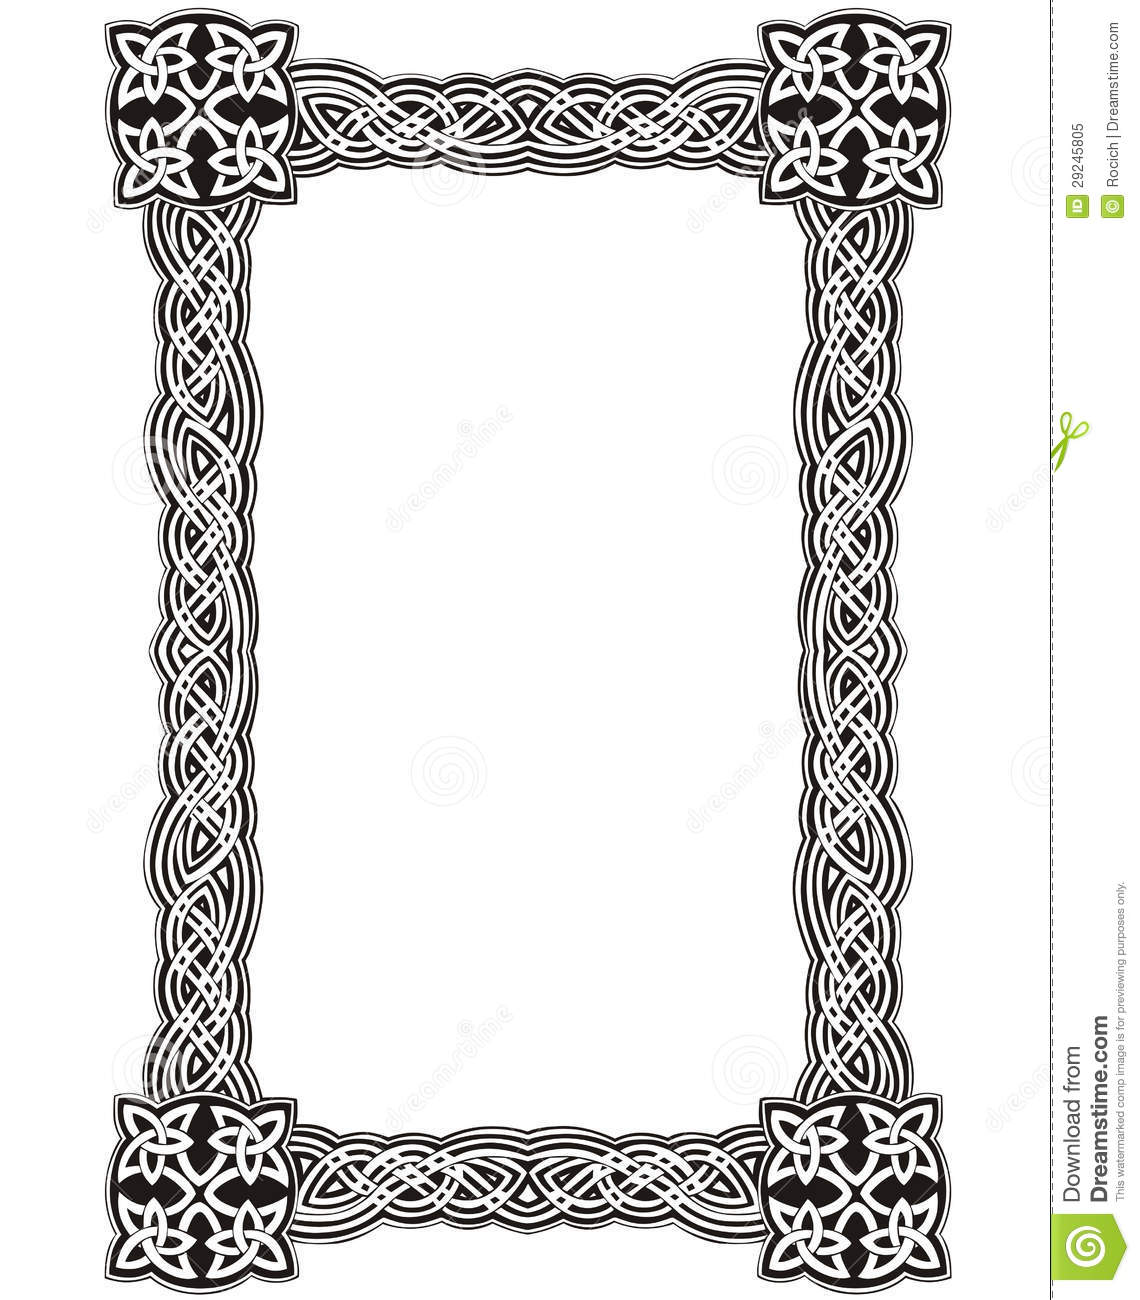 Celtic Knot Borders and Frames